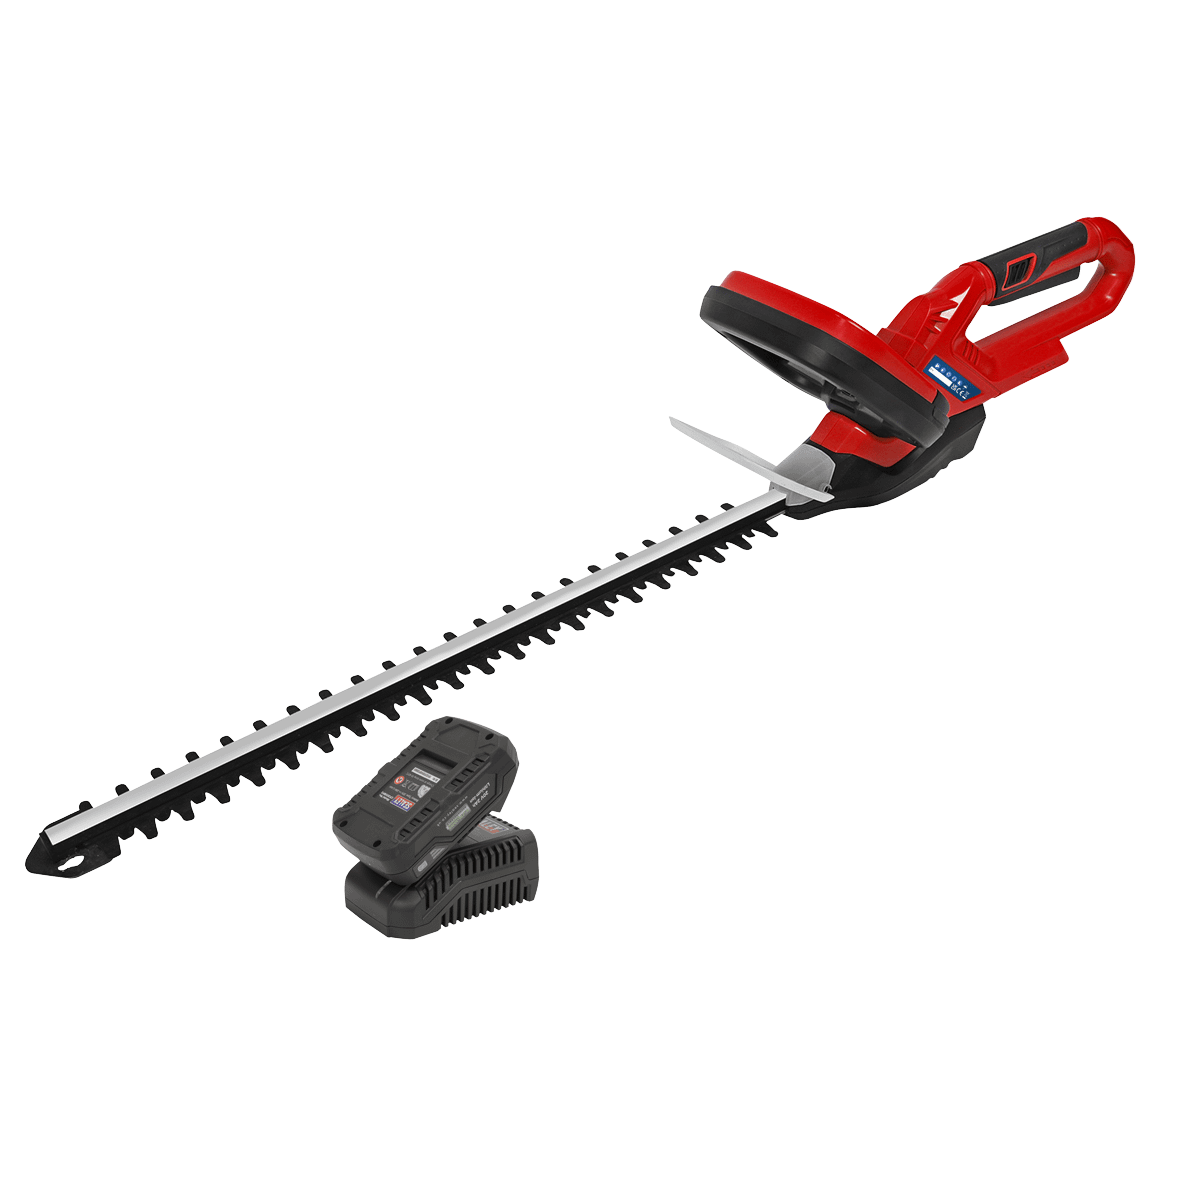 Sealey Cordless Hedge Trimmer Combo 20V Series